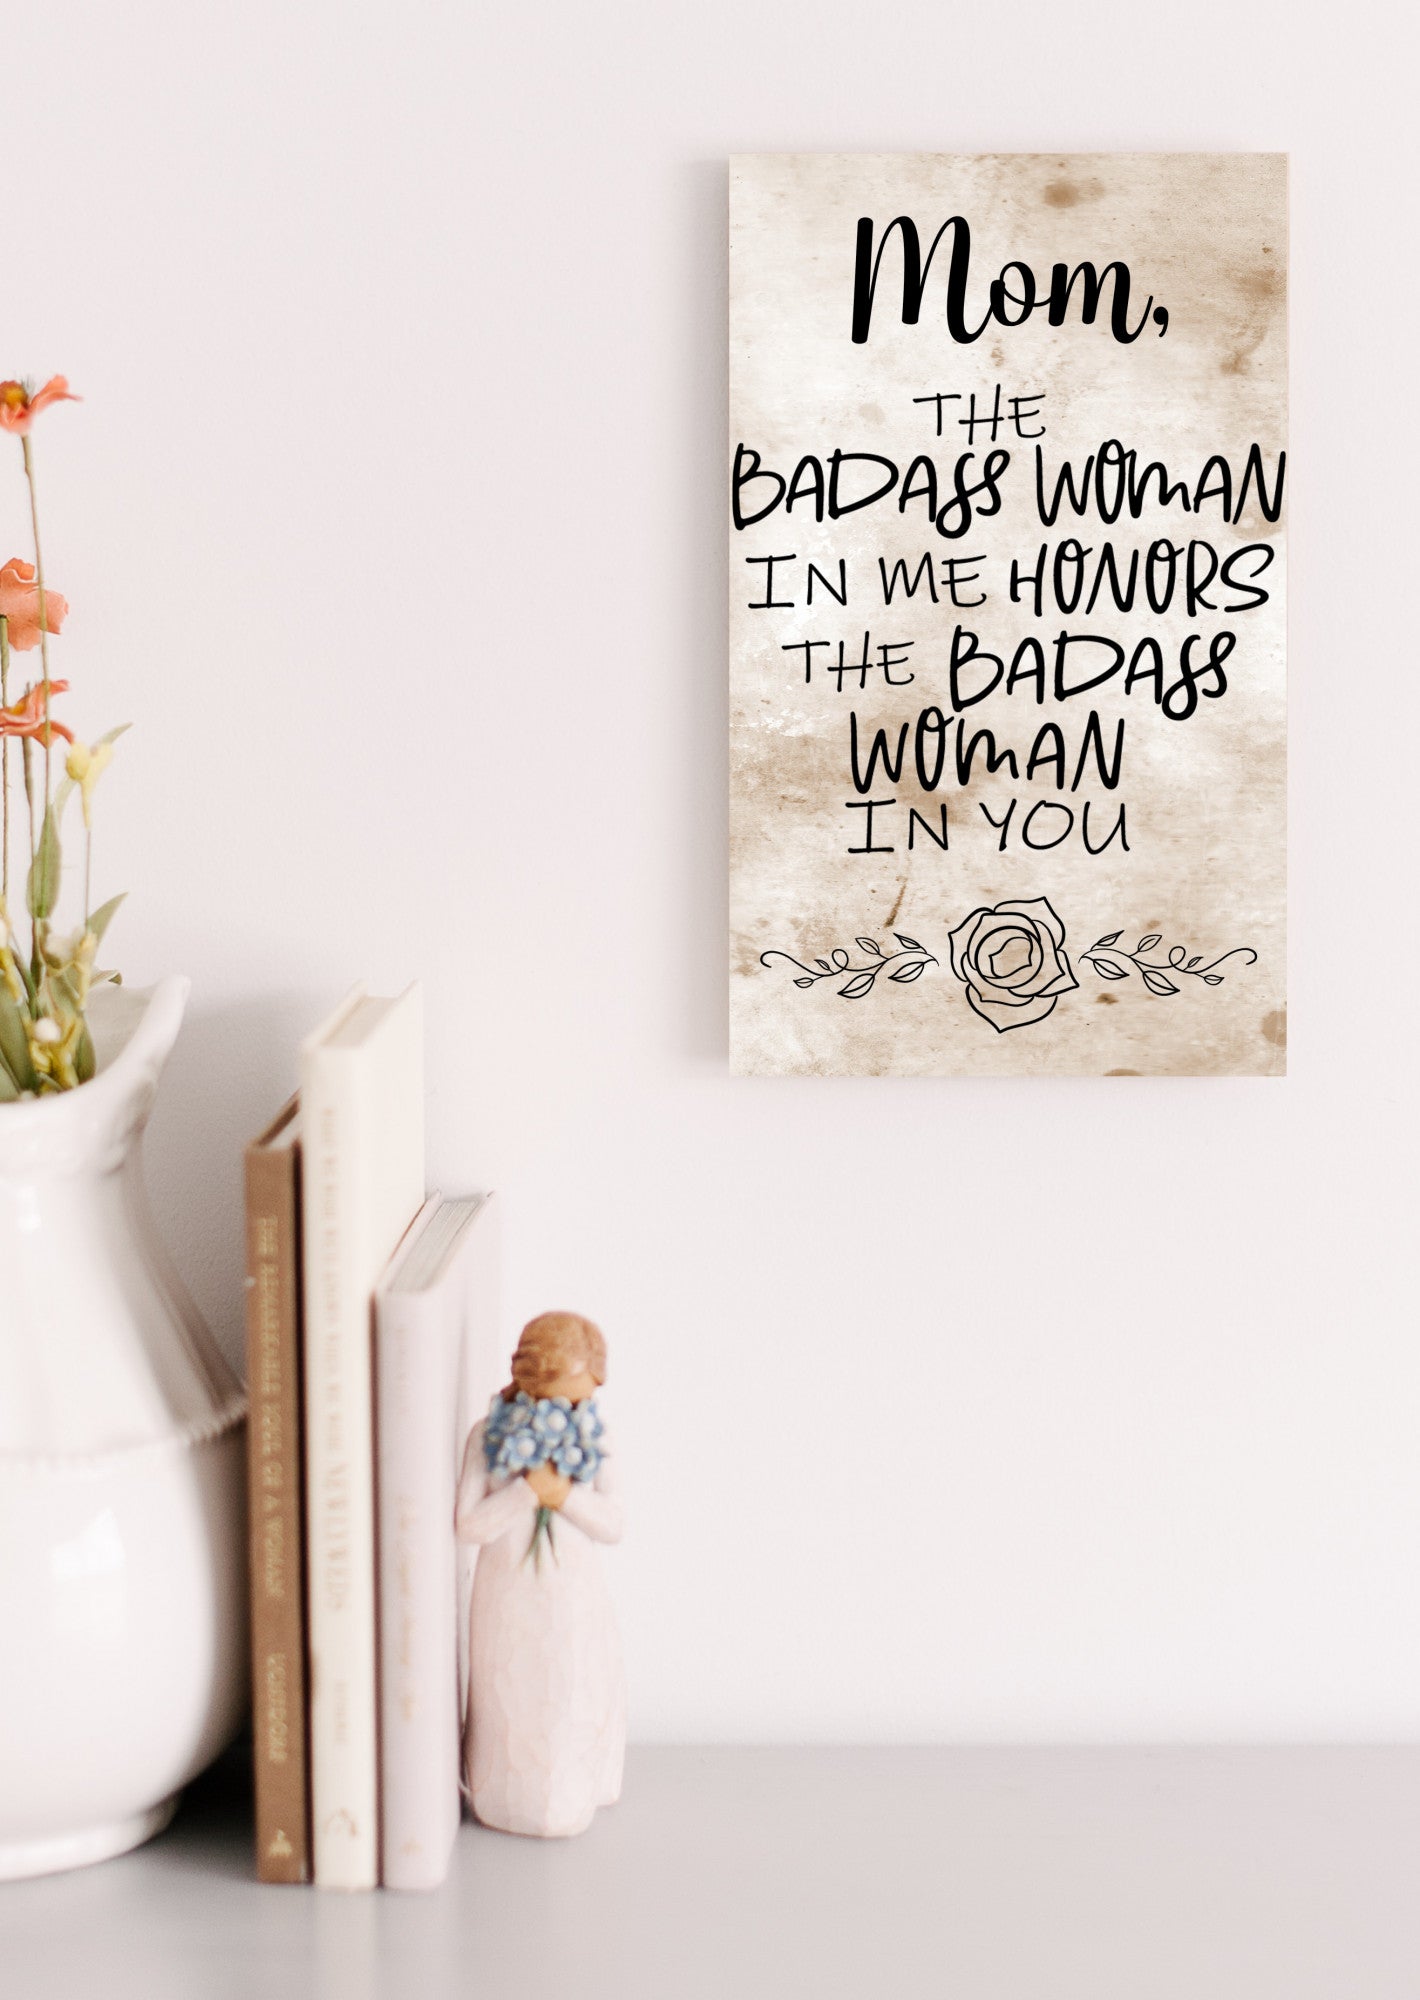 Mom, The Badass Woman In Me Honors The Badass Woman In You Sign